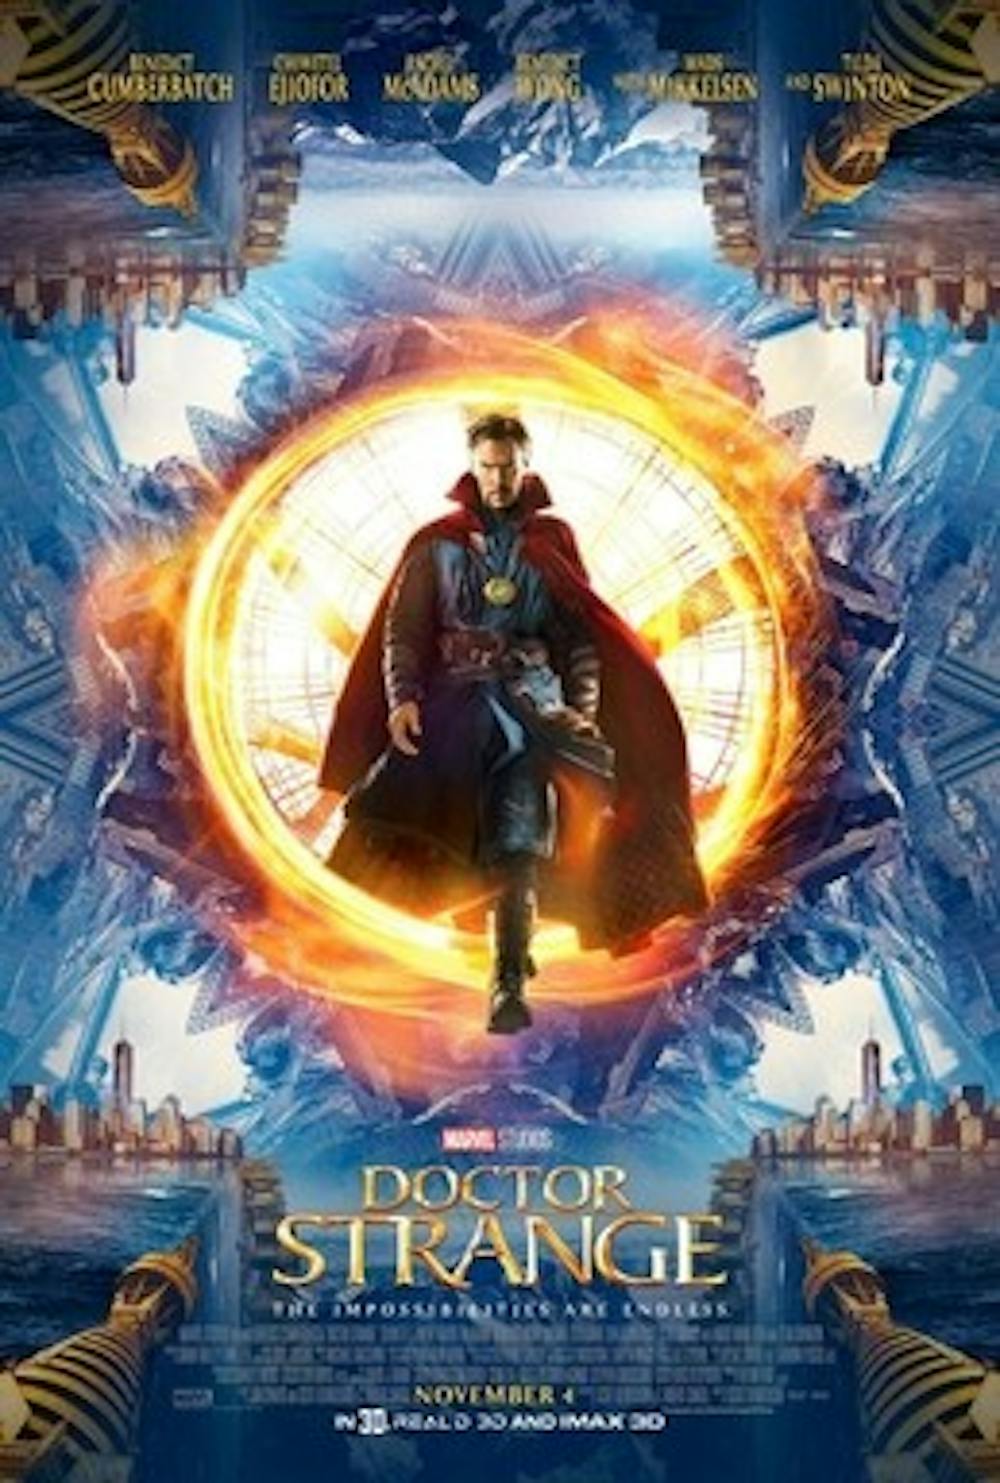 <p>Doctor Strange, the newest Marvel Comics superhero film, follows former neurosurgeon Dr. Stephen Strange after he receives magical&nbsp;powers while searching for healing in a mysterious enclave. The 2016 film is the 14th movie of the Marvel Cinematic Universe.&nbsp;<i style="font-size: 14px;">Wikipedia // Photo Courtesy</i></p>